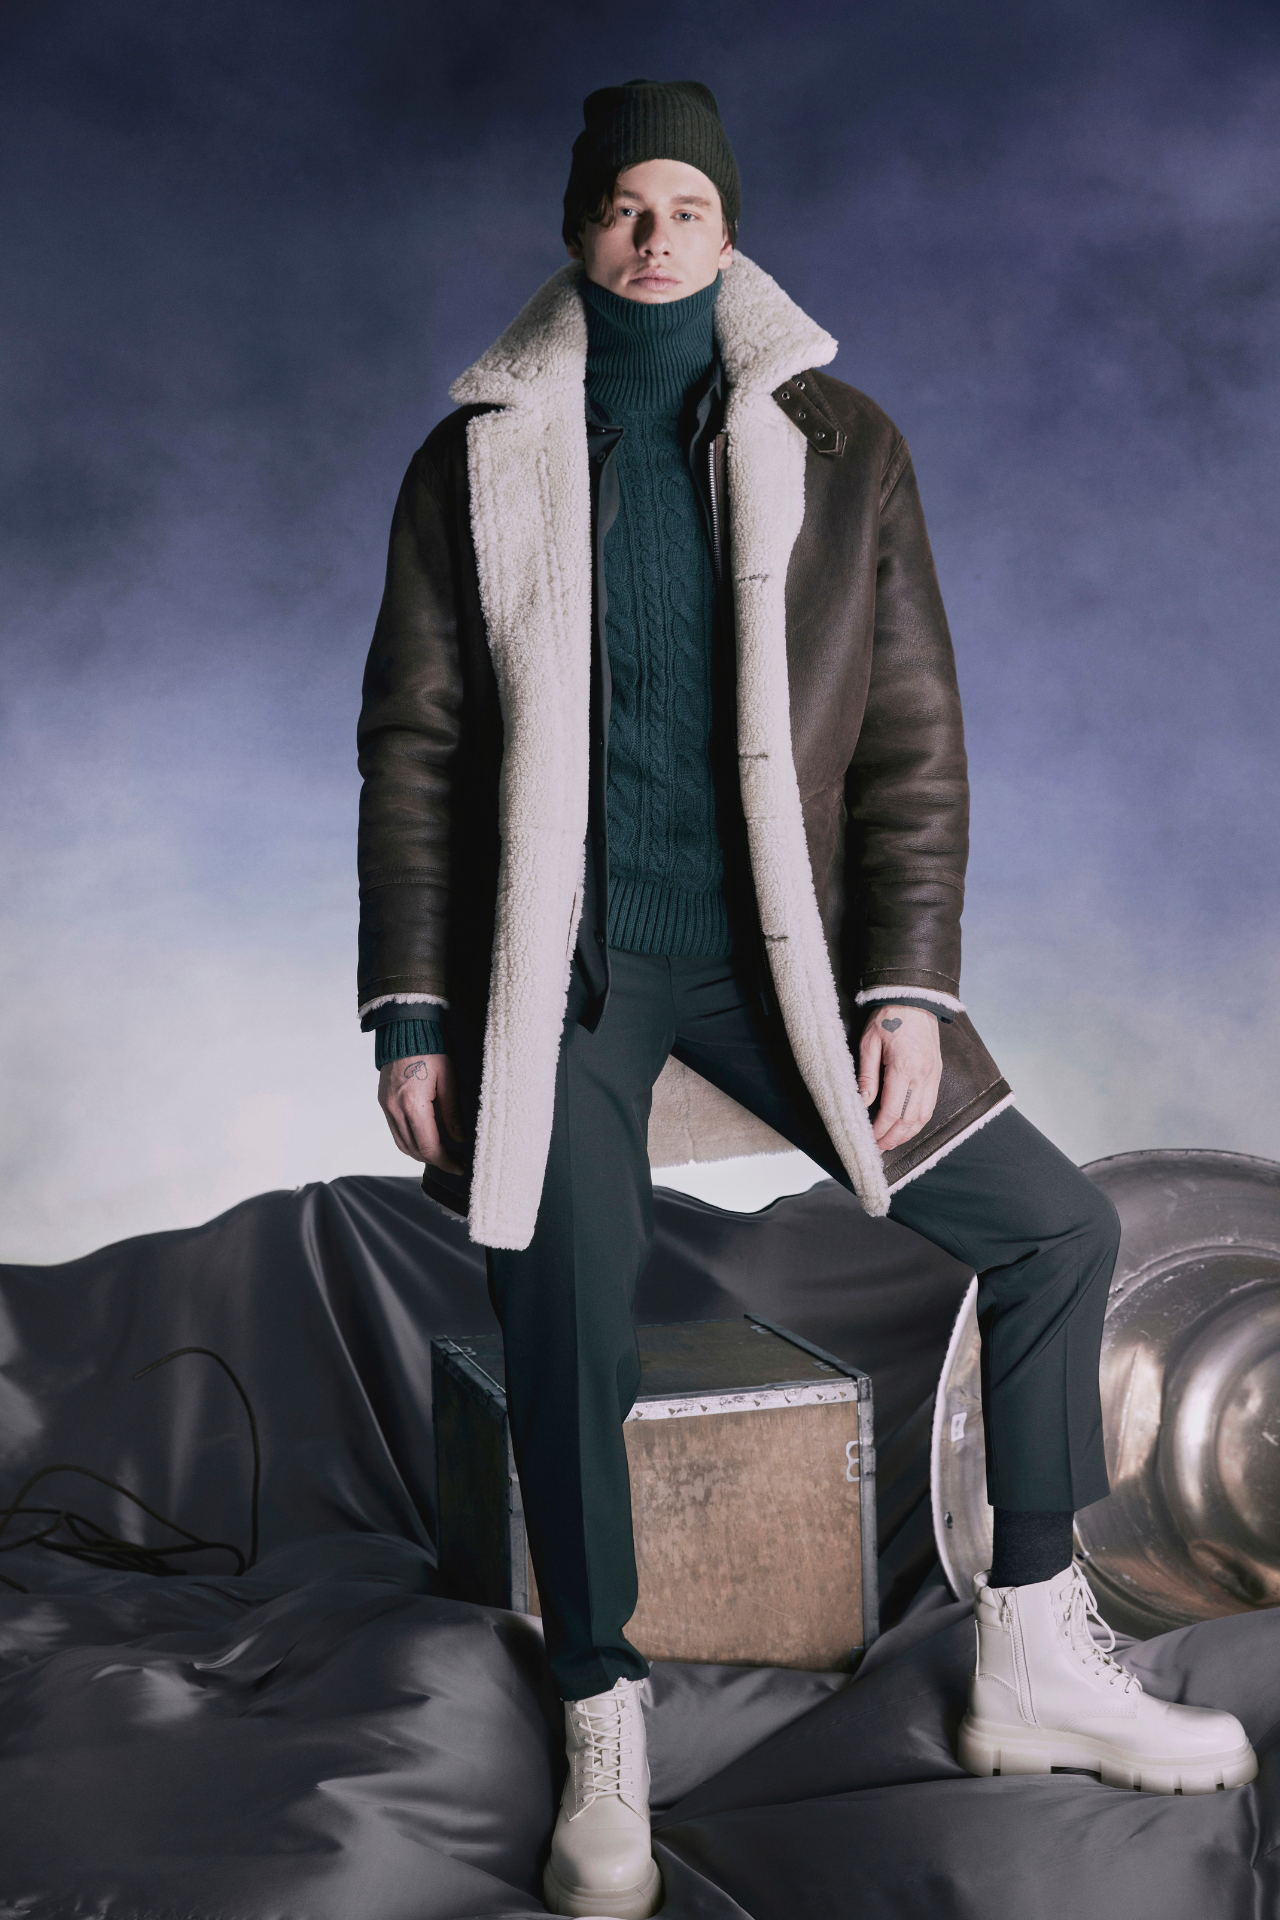 Explore winter in style with Chance, our designer mens shearling in arabica nappa coat. Reversible to a cozy curly wool teddy, it's warm and versatile. True to size, it fits comfortably with a loose fit through the torso and fits snugly across the shoulders. This 37" inch coat features a zip closure, 3-button closure, notch collar, and practical slash and patch pockets.